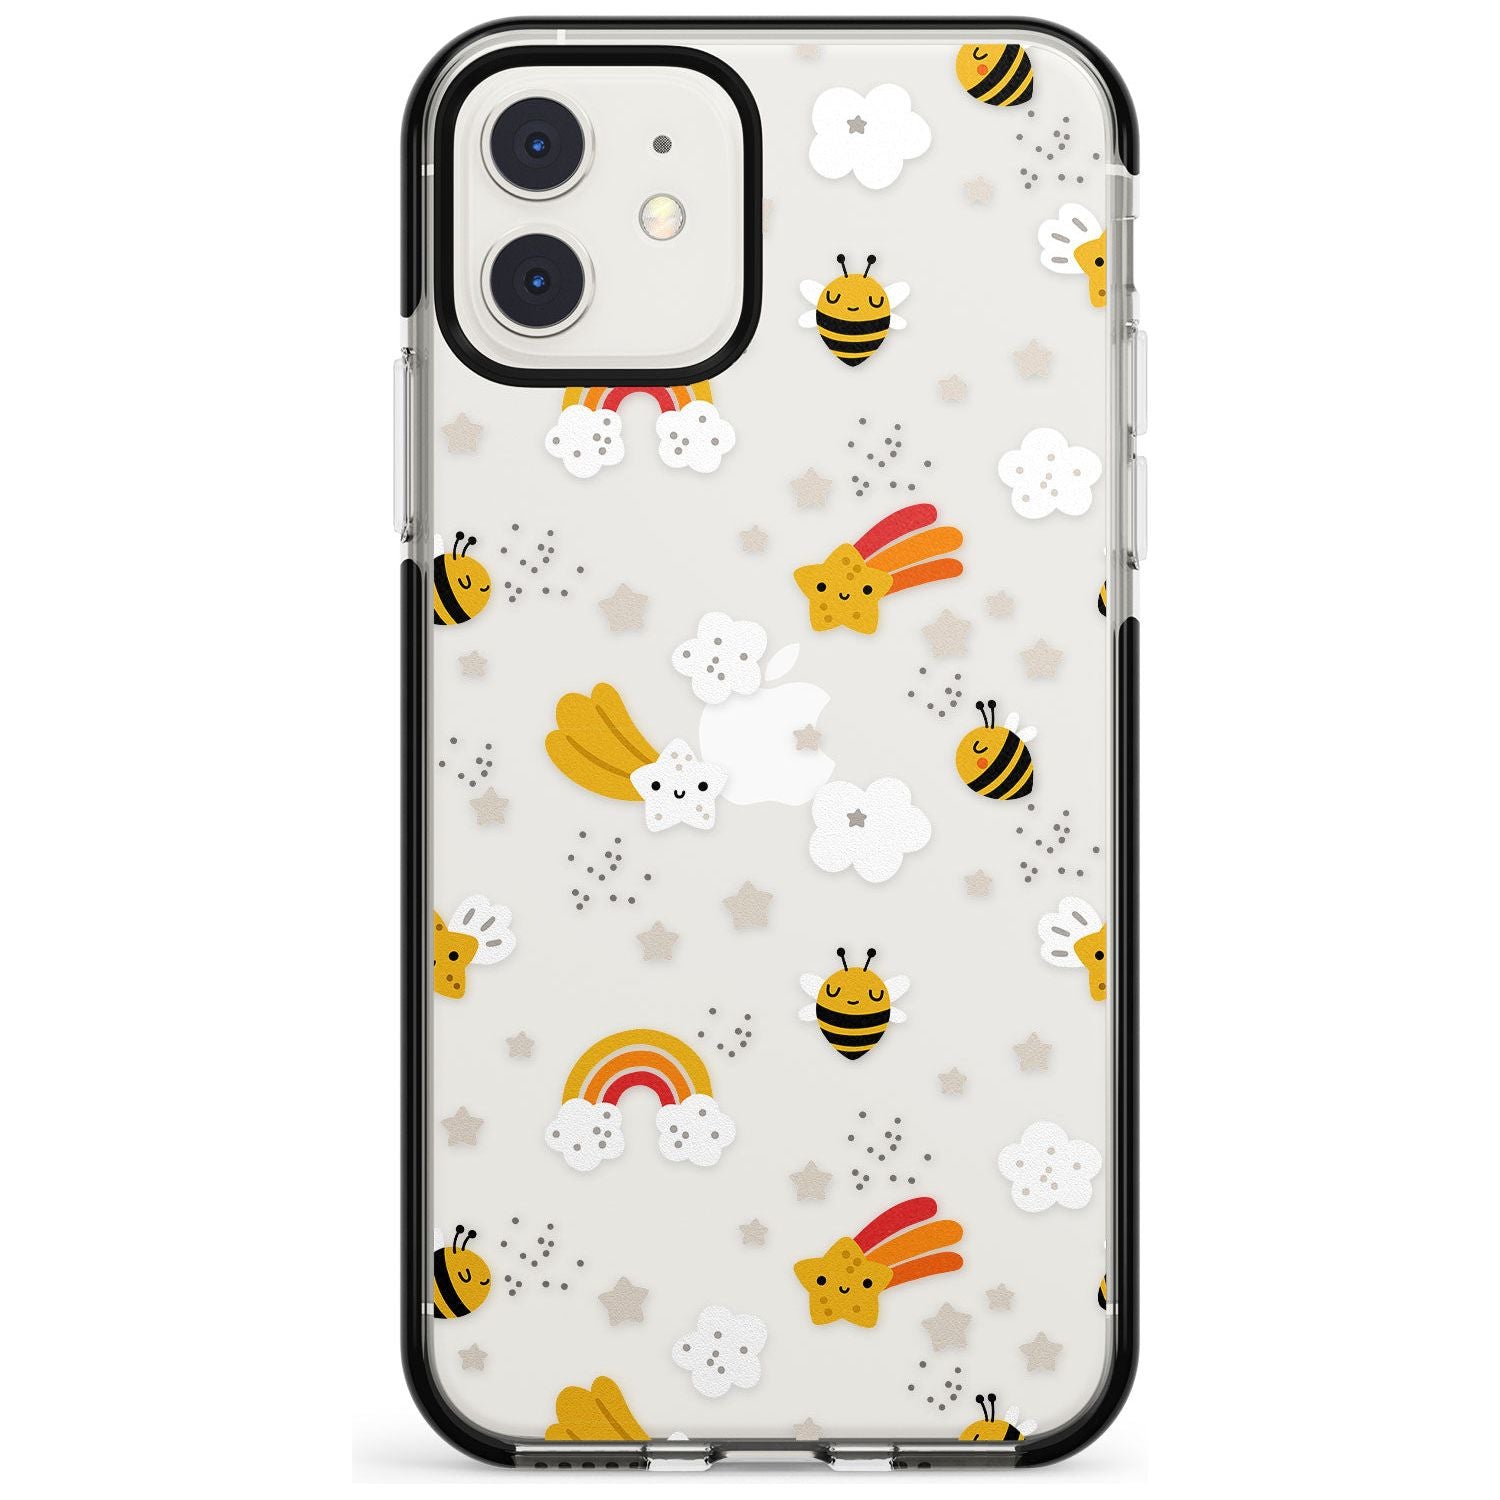 Busy Bee Black Impact Phone Case for iPhone 11